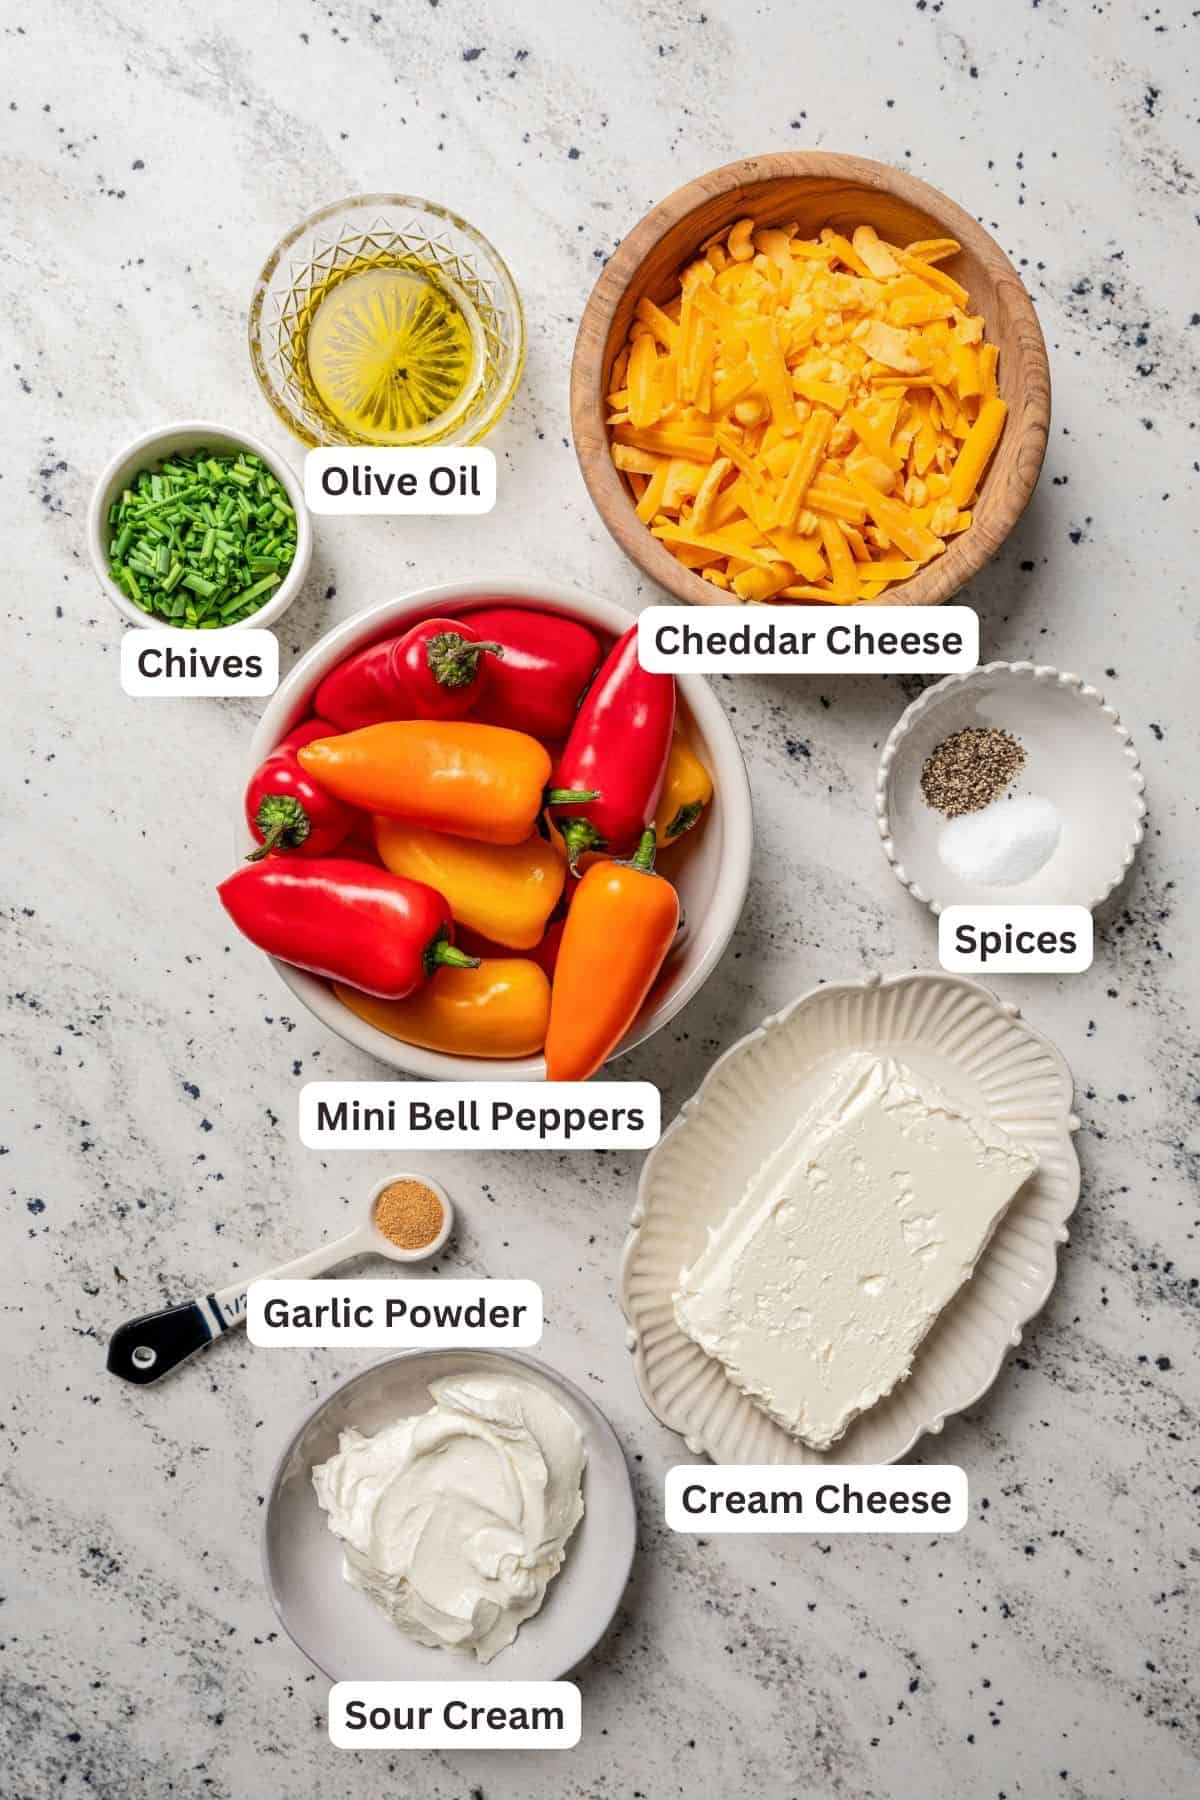 Cream cheese stuffed peppers ingredients with text labels overlaying each ingredient.